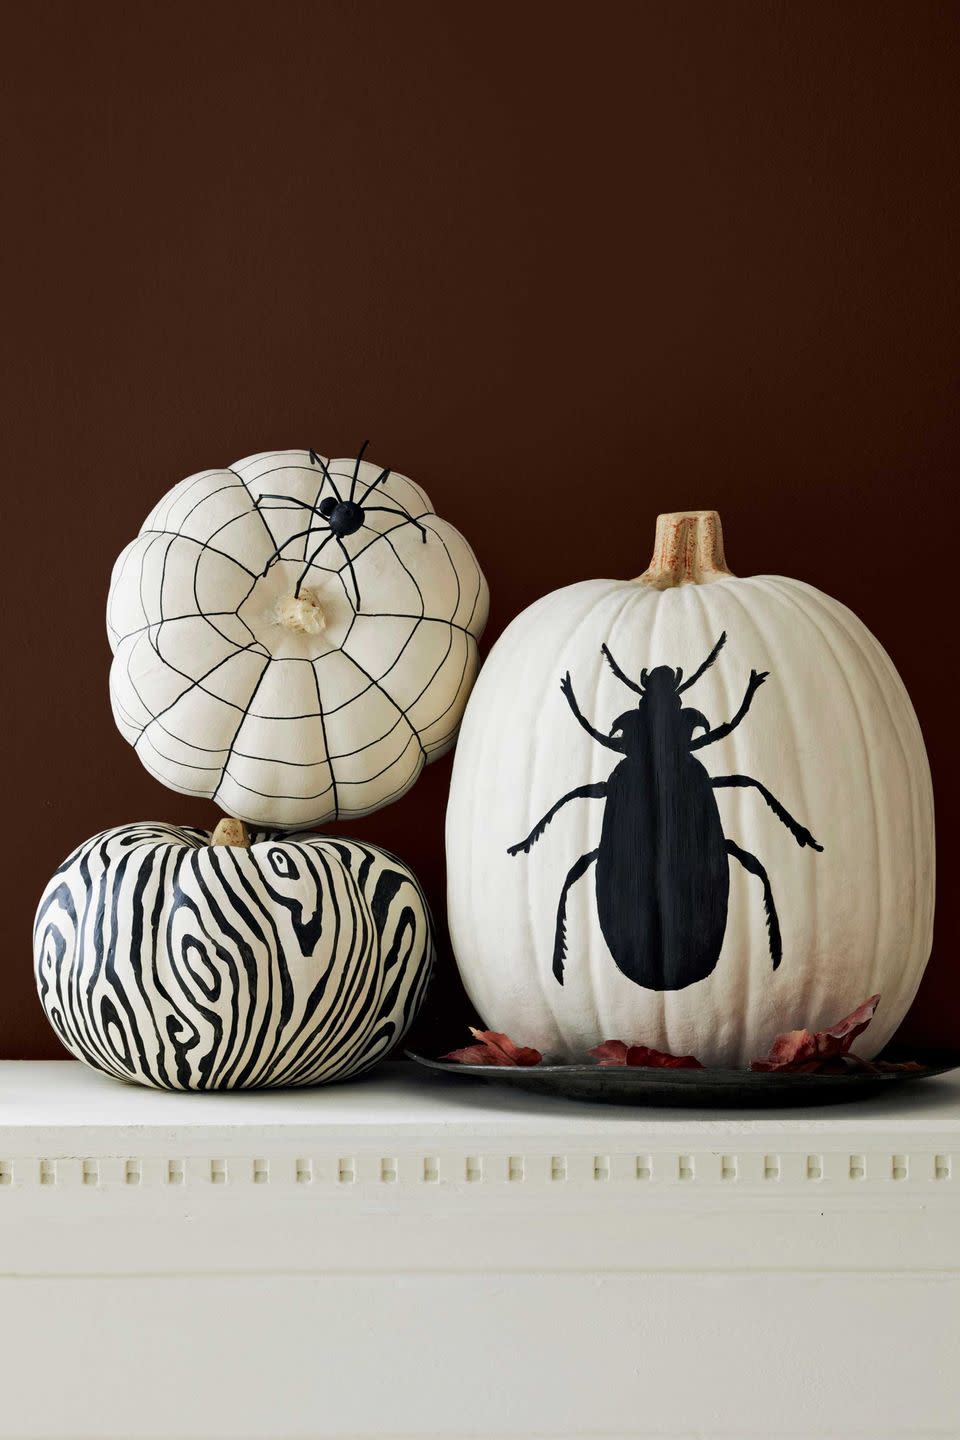 Black-and-White Painted Pumpkins